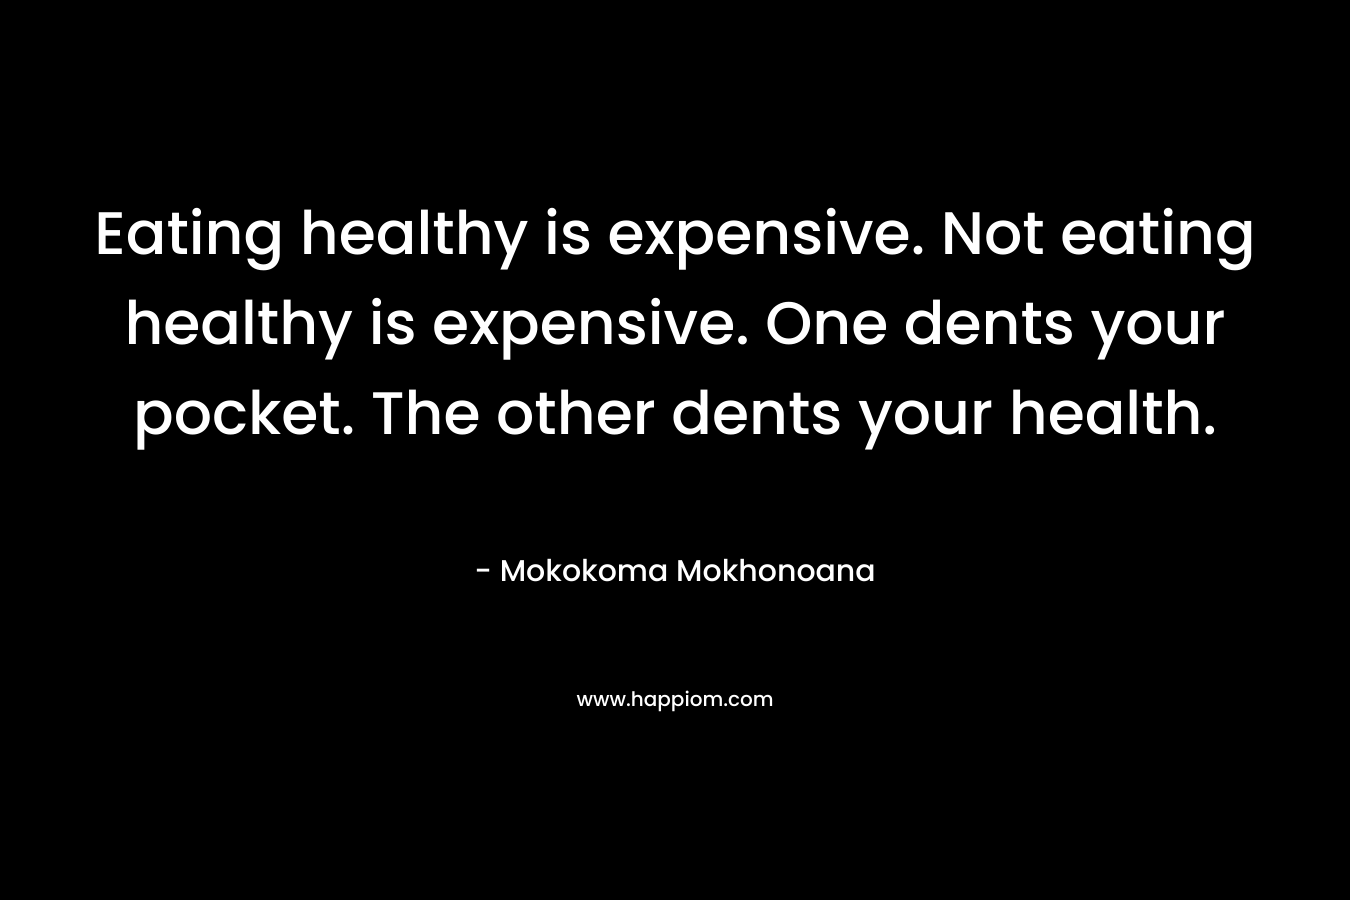 Eating healthy is expensive. Not eating healthy is expensive. One dents your pocket. The other dents your health. – Mokokoma Mokhonoana